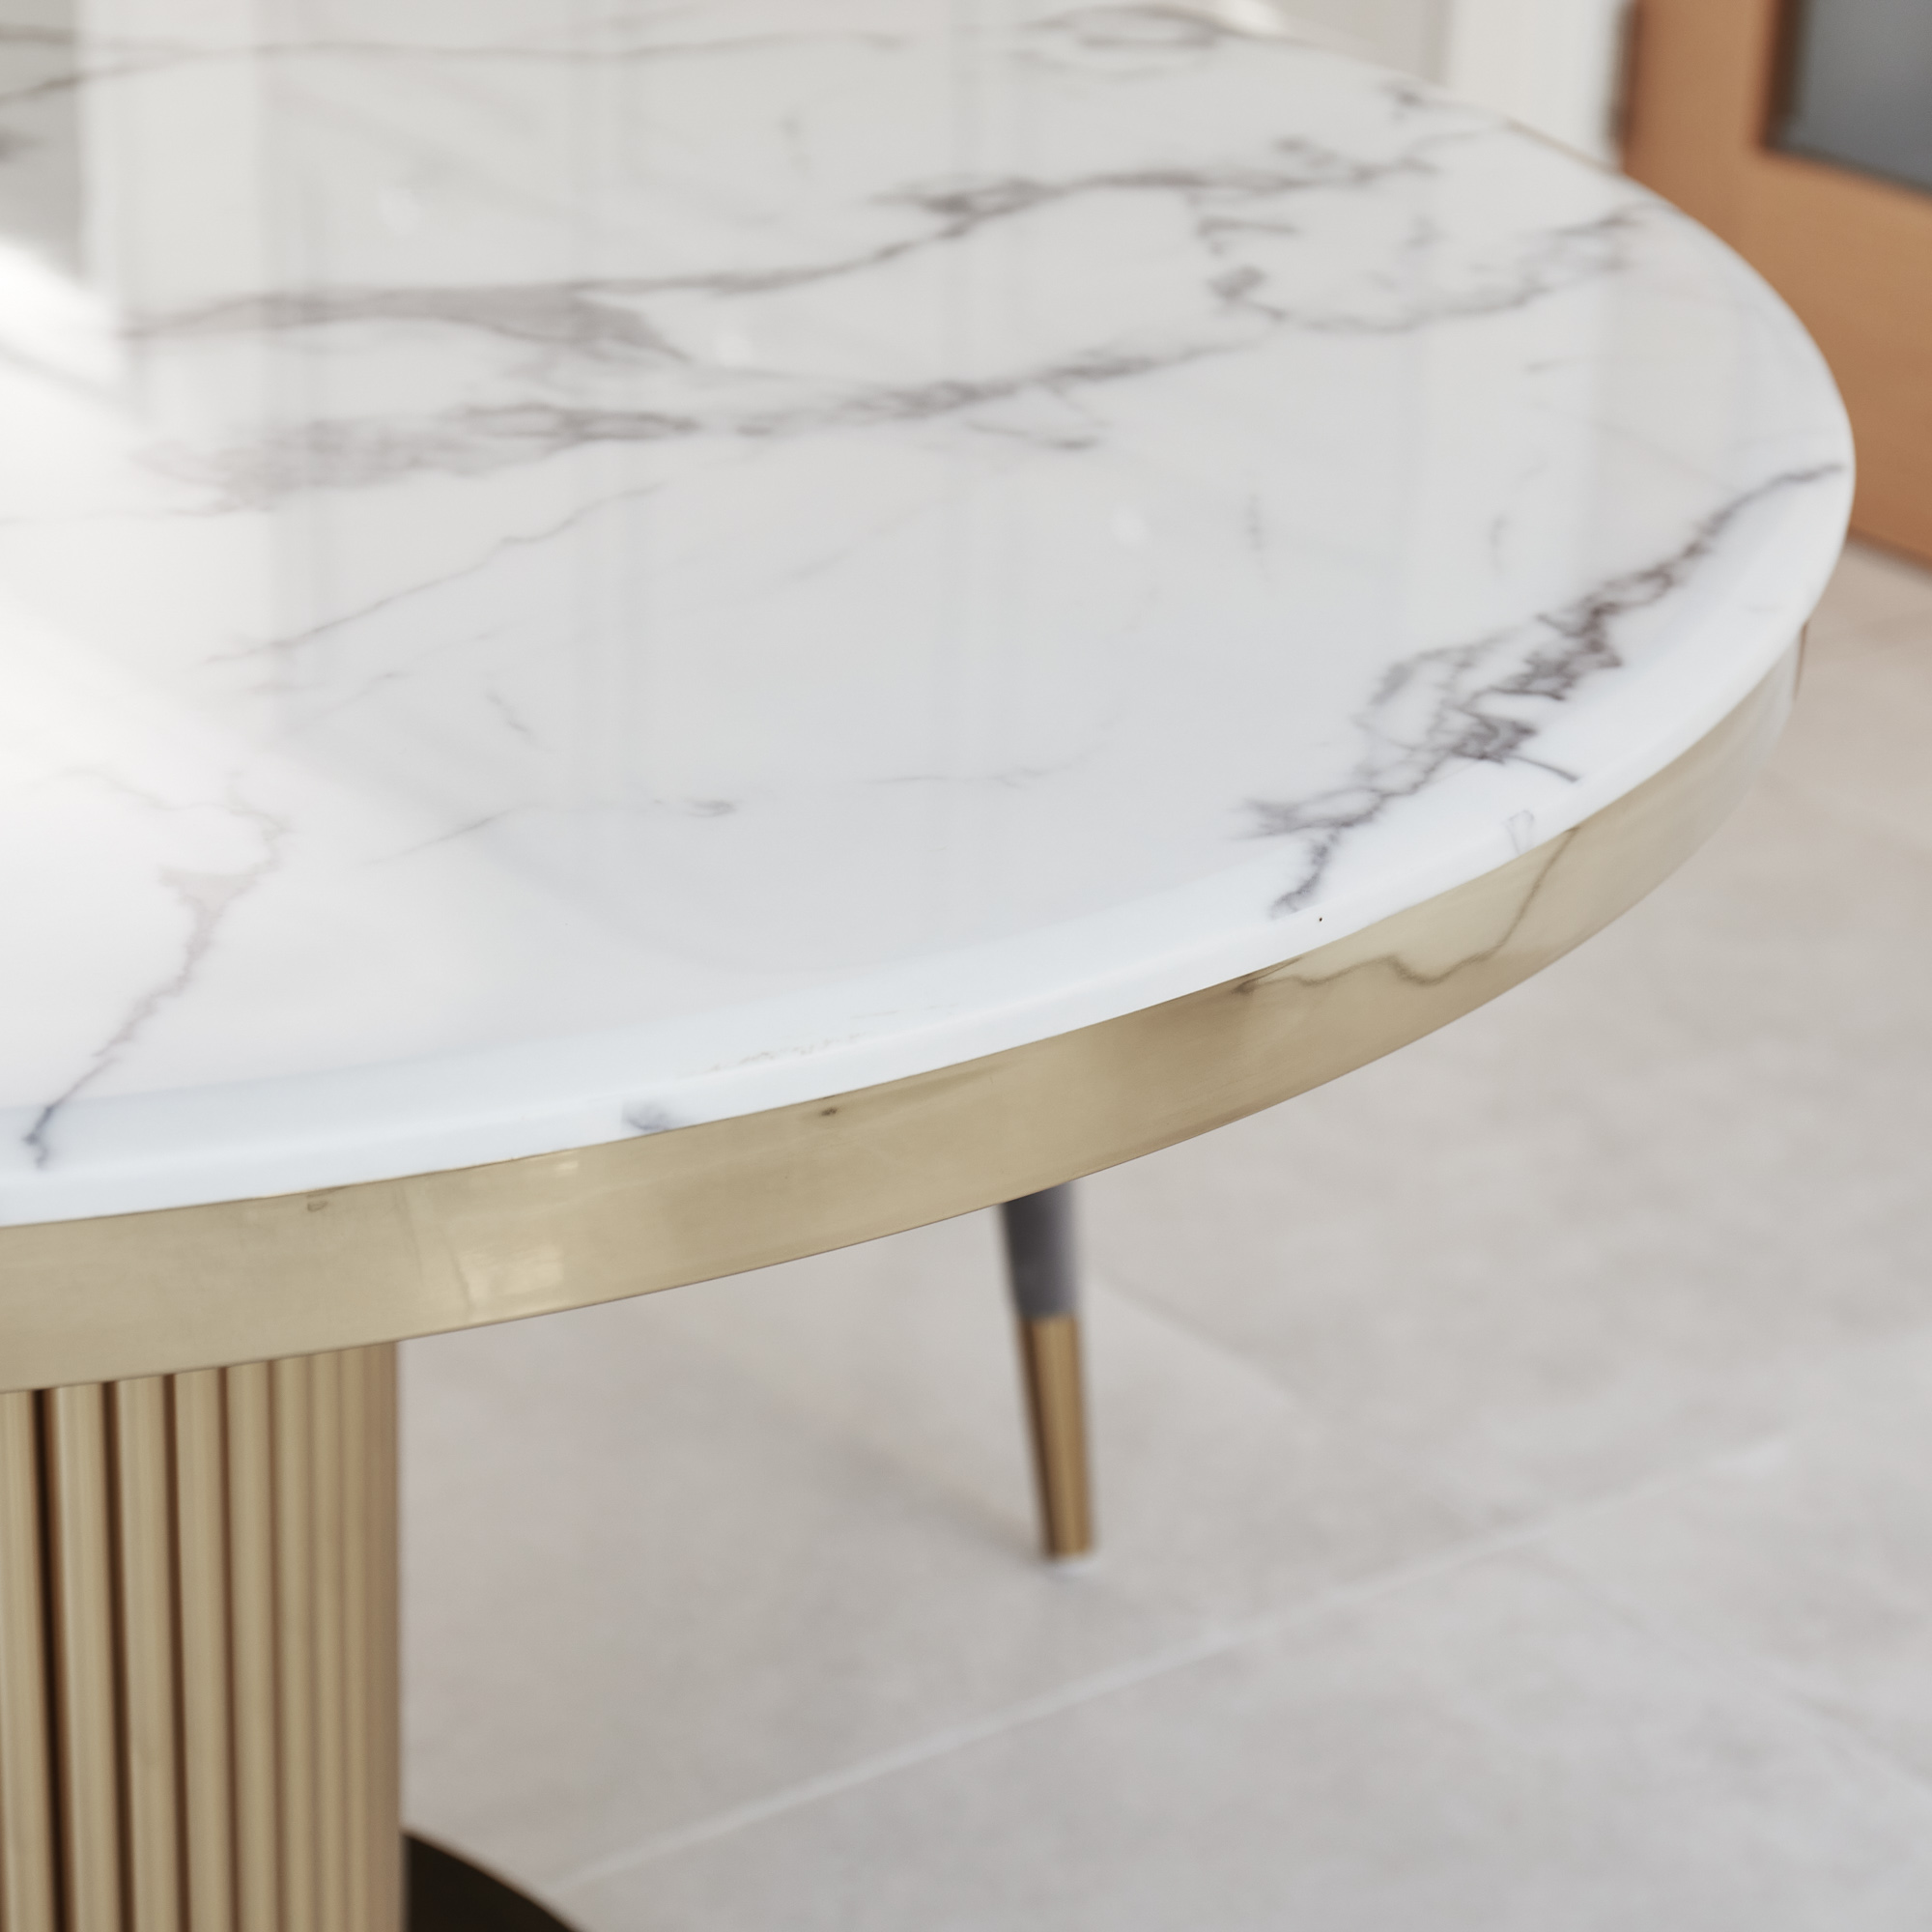 1.3M Circular Pedestal Gold Stainless Steel Dining Table with White Marble Effect